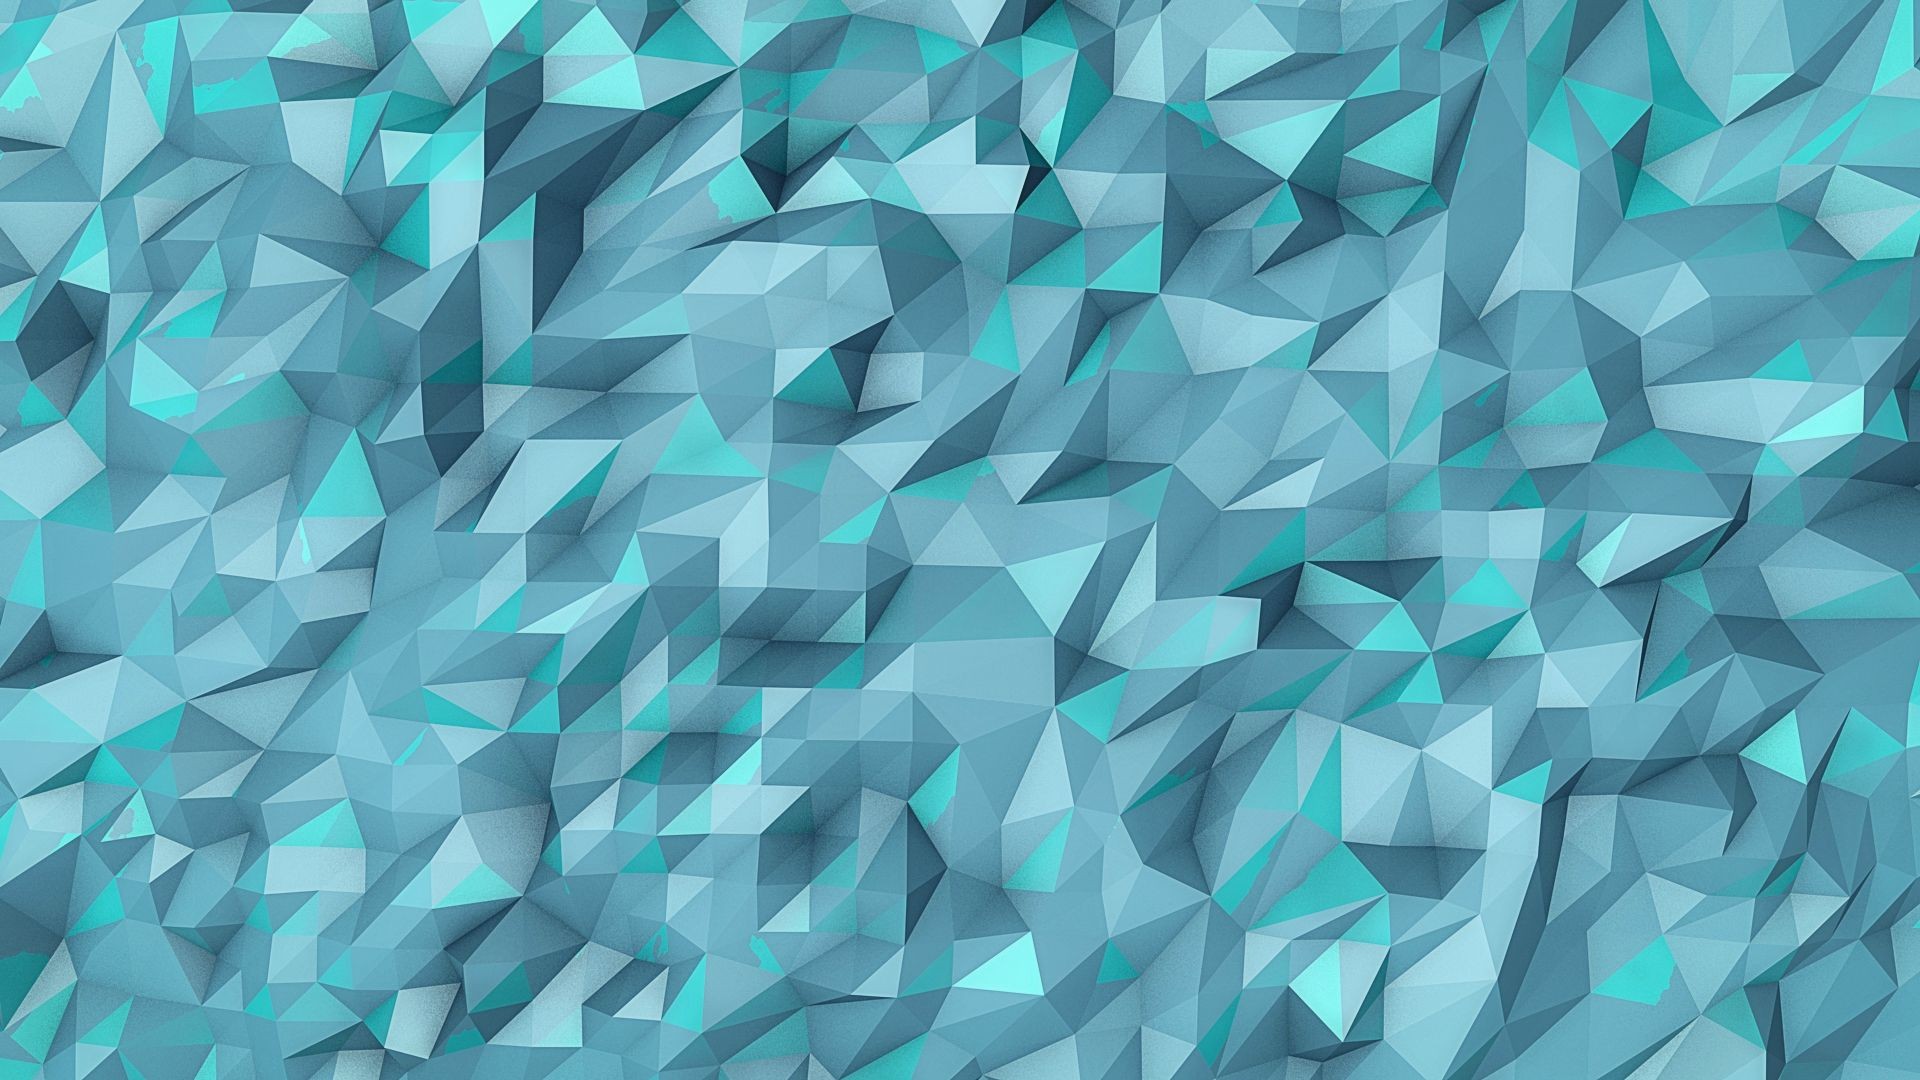 Wallpaper, abstract, low poly, symmetry, green, blue, triangle, pattern, texture, circle, turquoise, aqua, color, shape, design, line, petal, 1920x1080 px 1920x1080